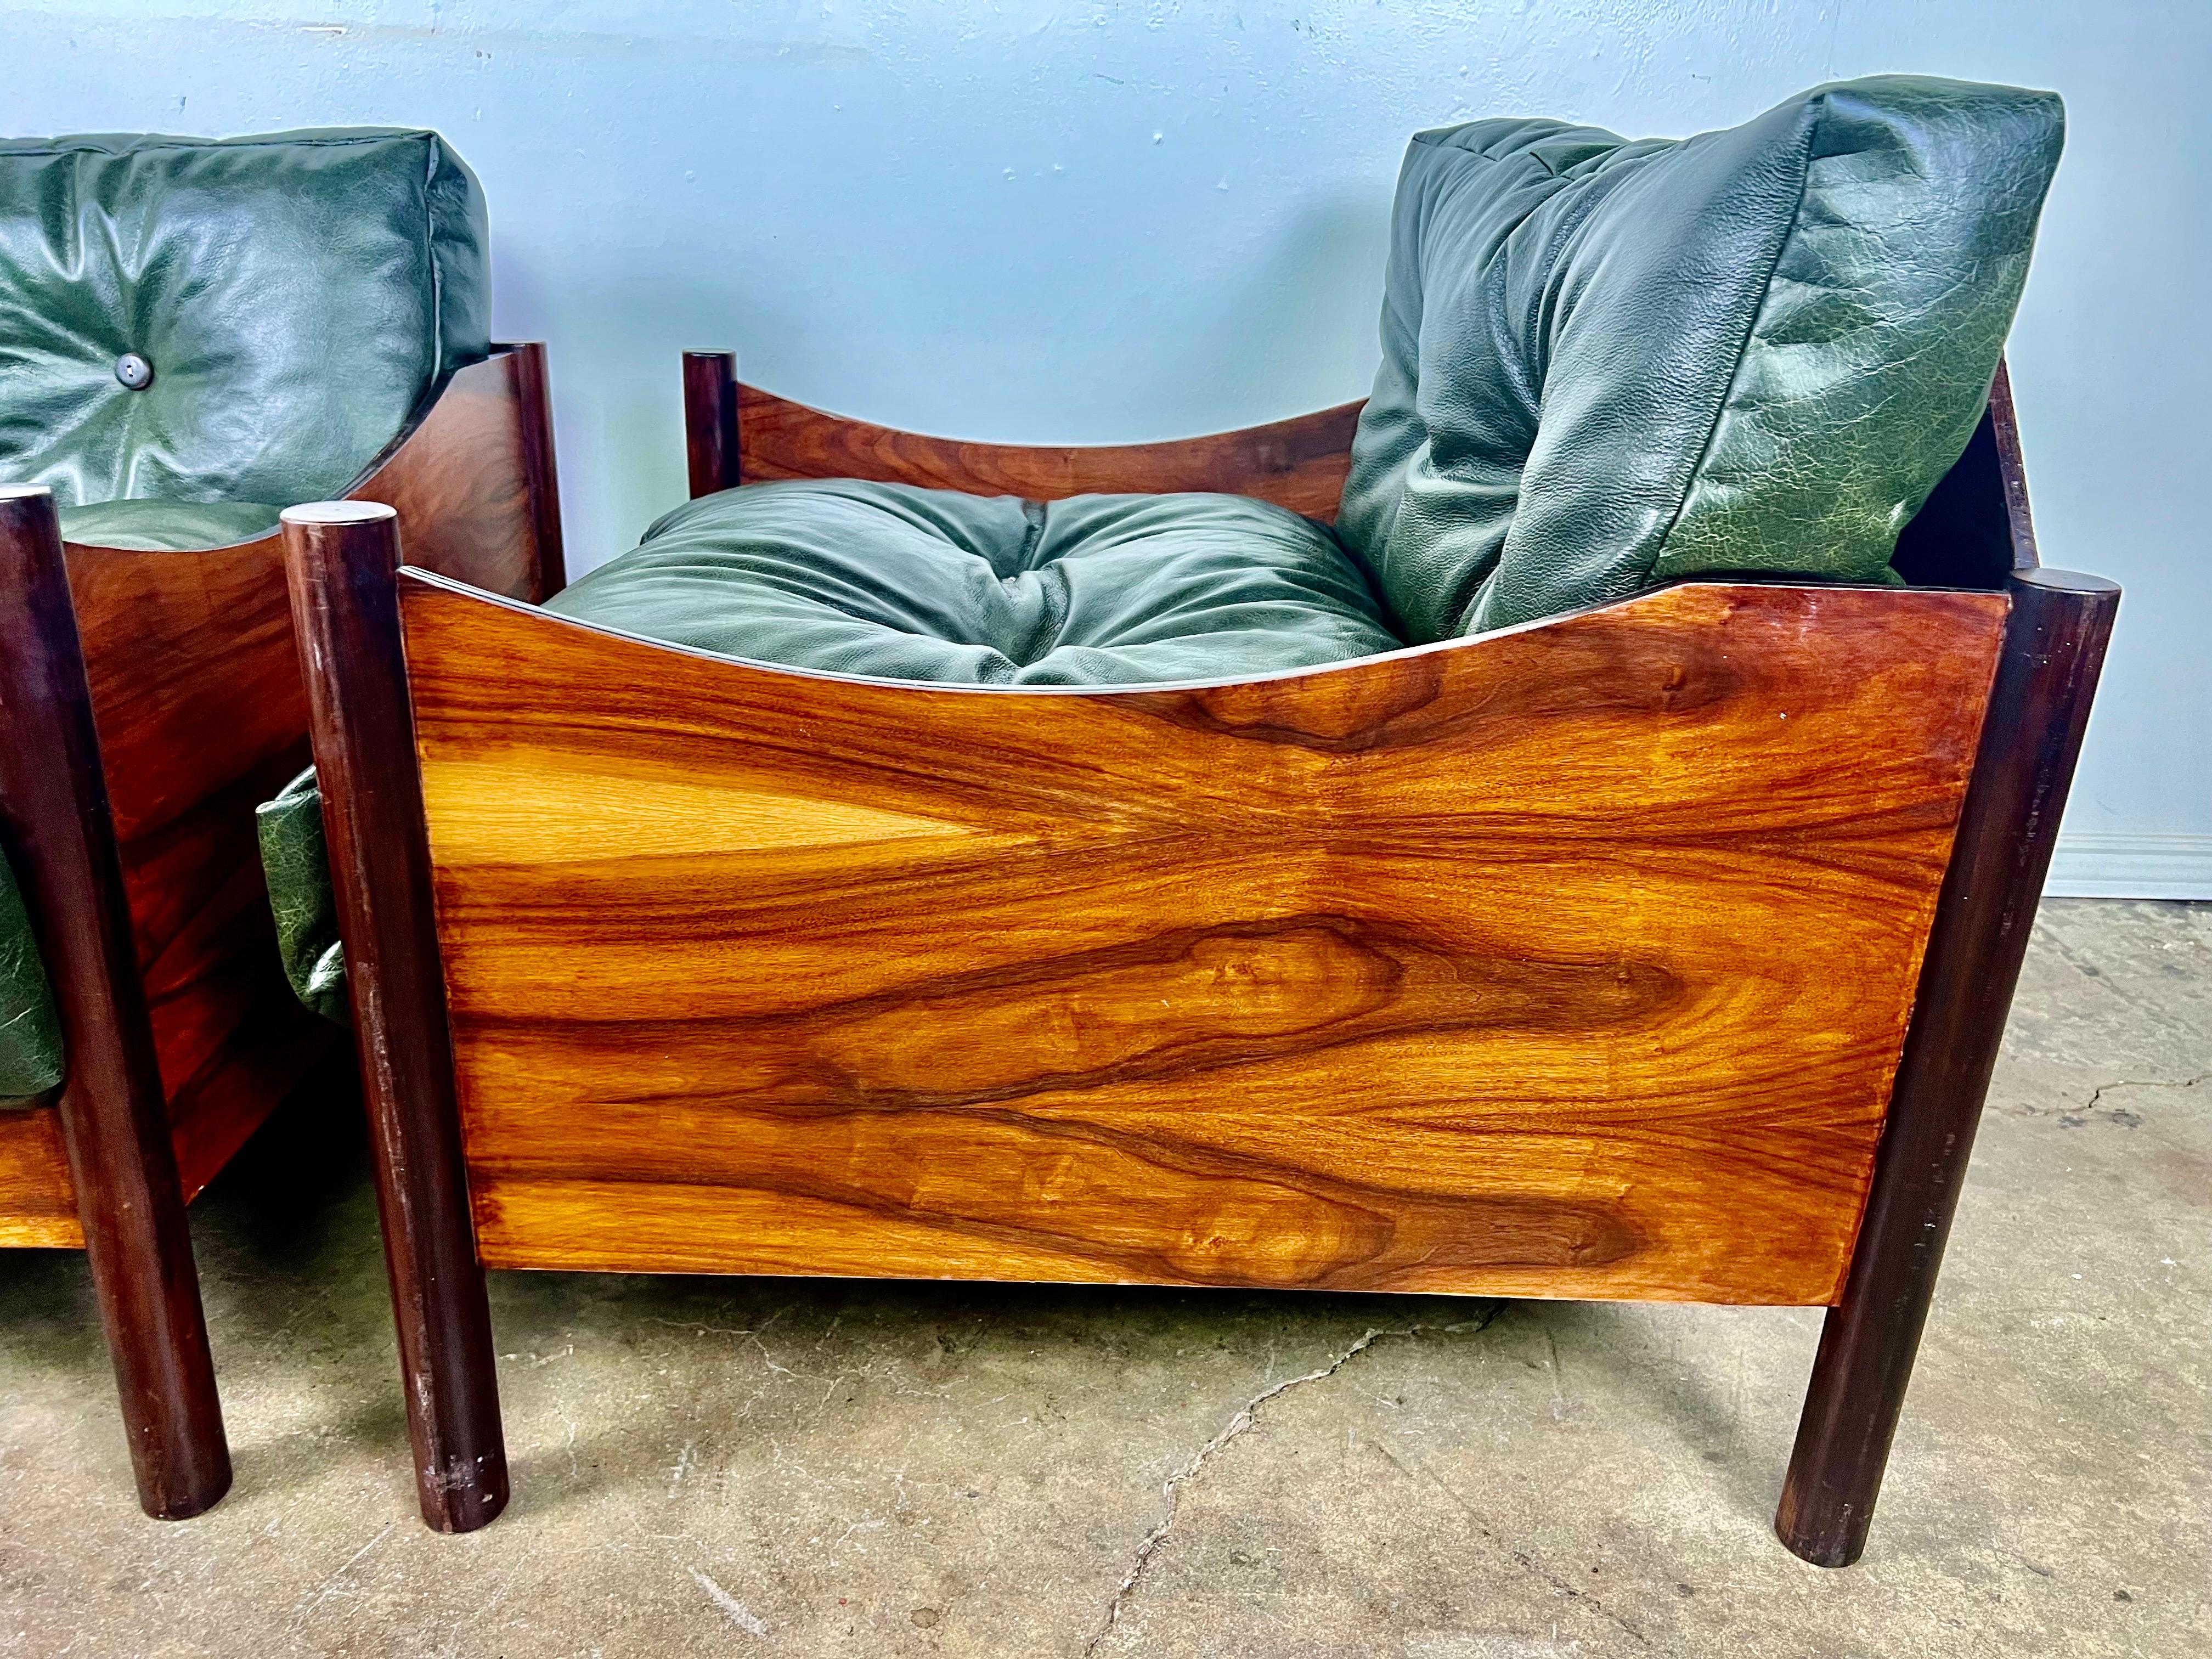 These Brazilian exotic rosewood armchairs from Industria Brasileira are a unique and exquisite find, especially with the custom made details and association with the 1960s designer furniture scene in Sao Paulo.  The green leather cushions add a